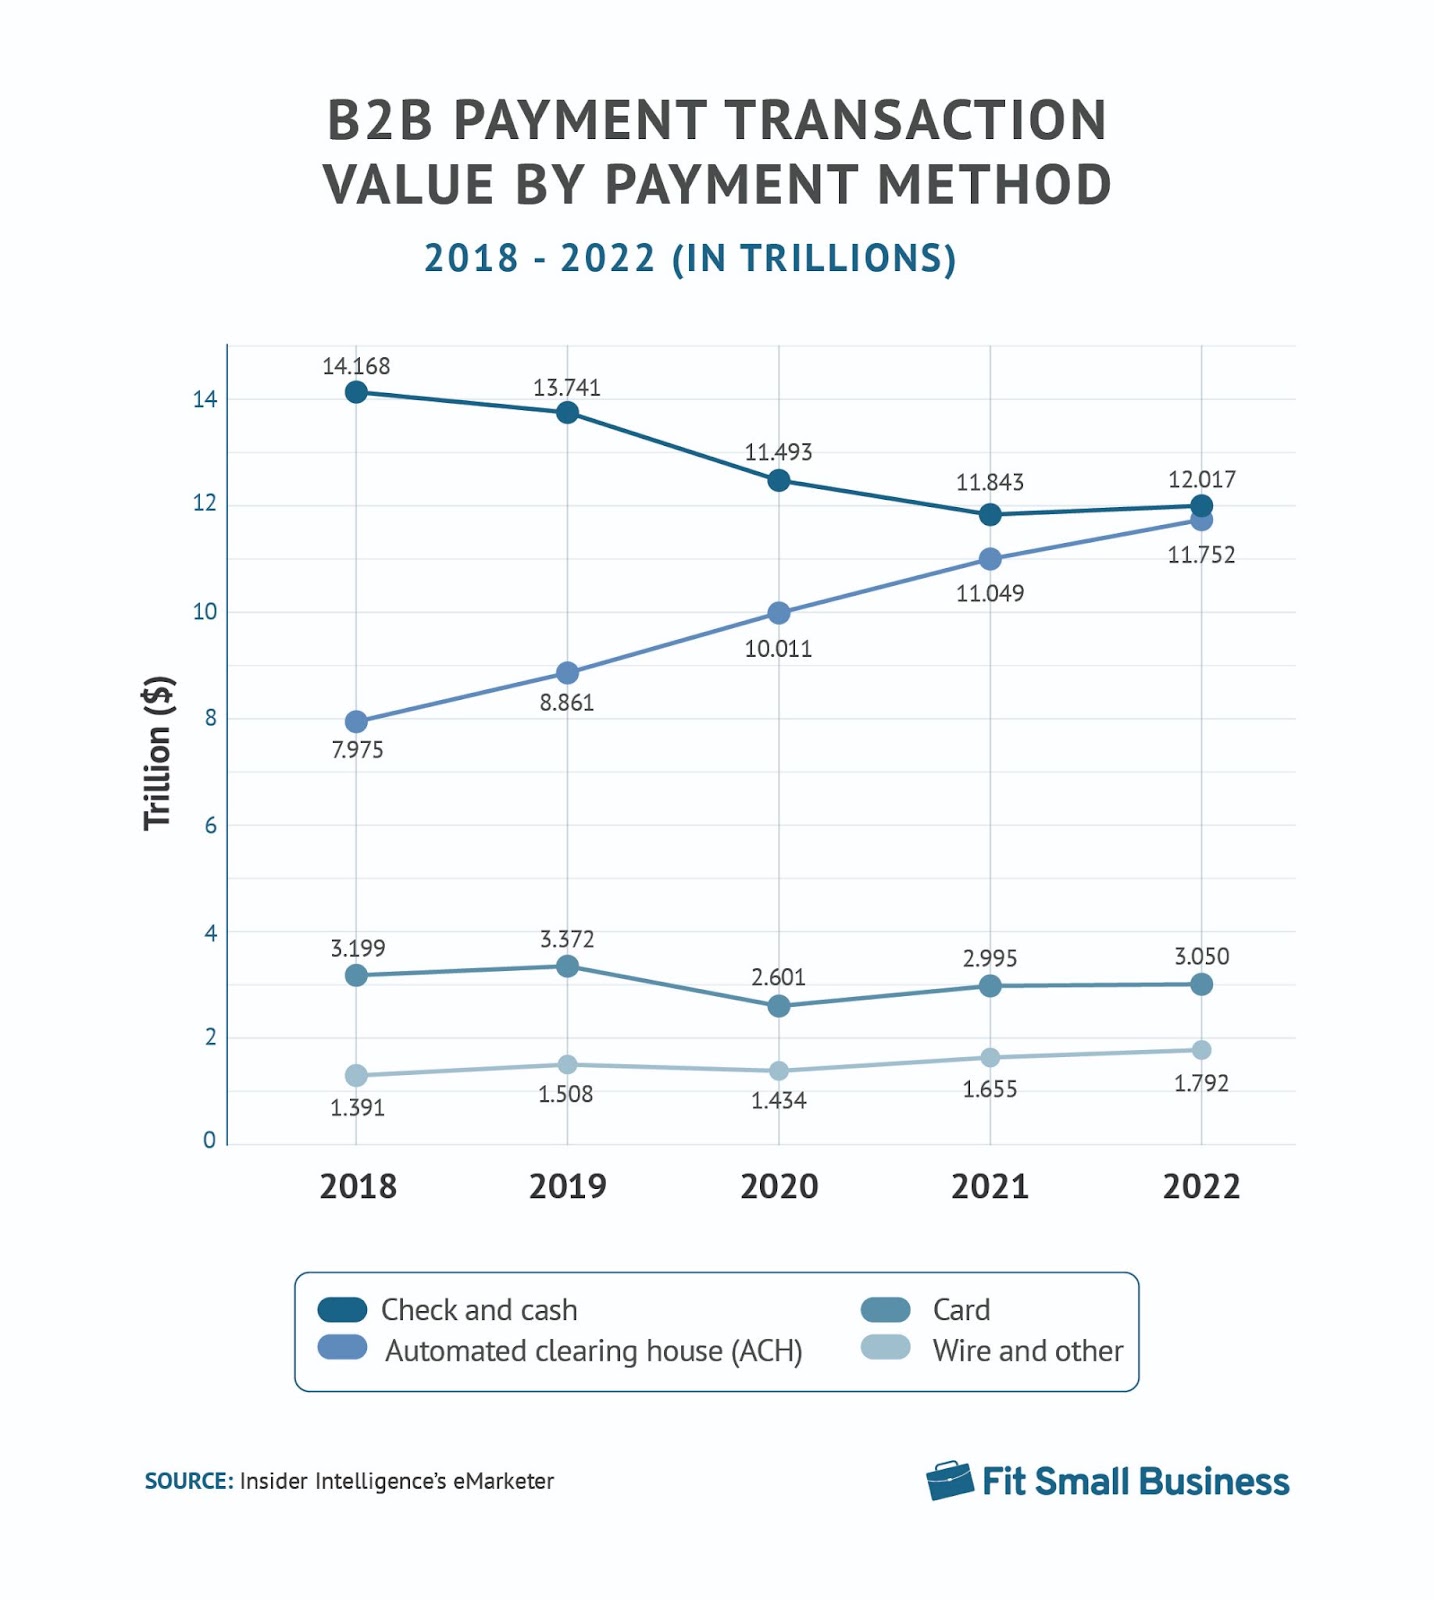 B2B payment transaction value by payment method 2018 to 2022.